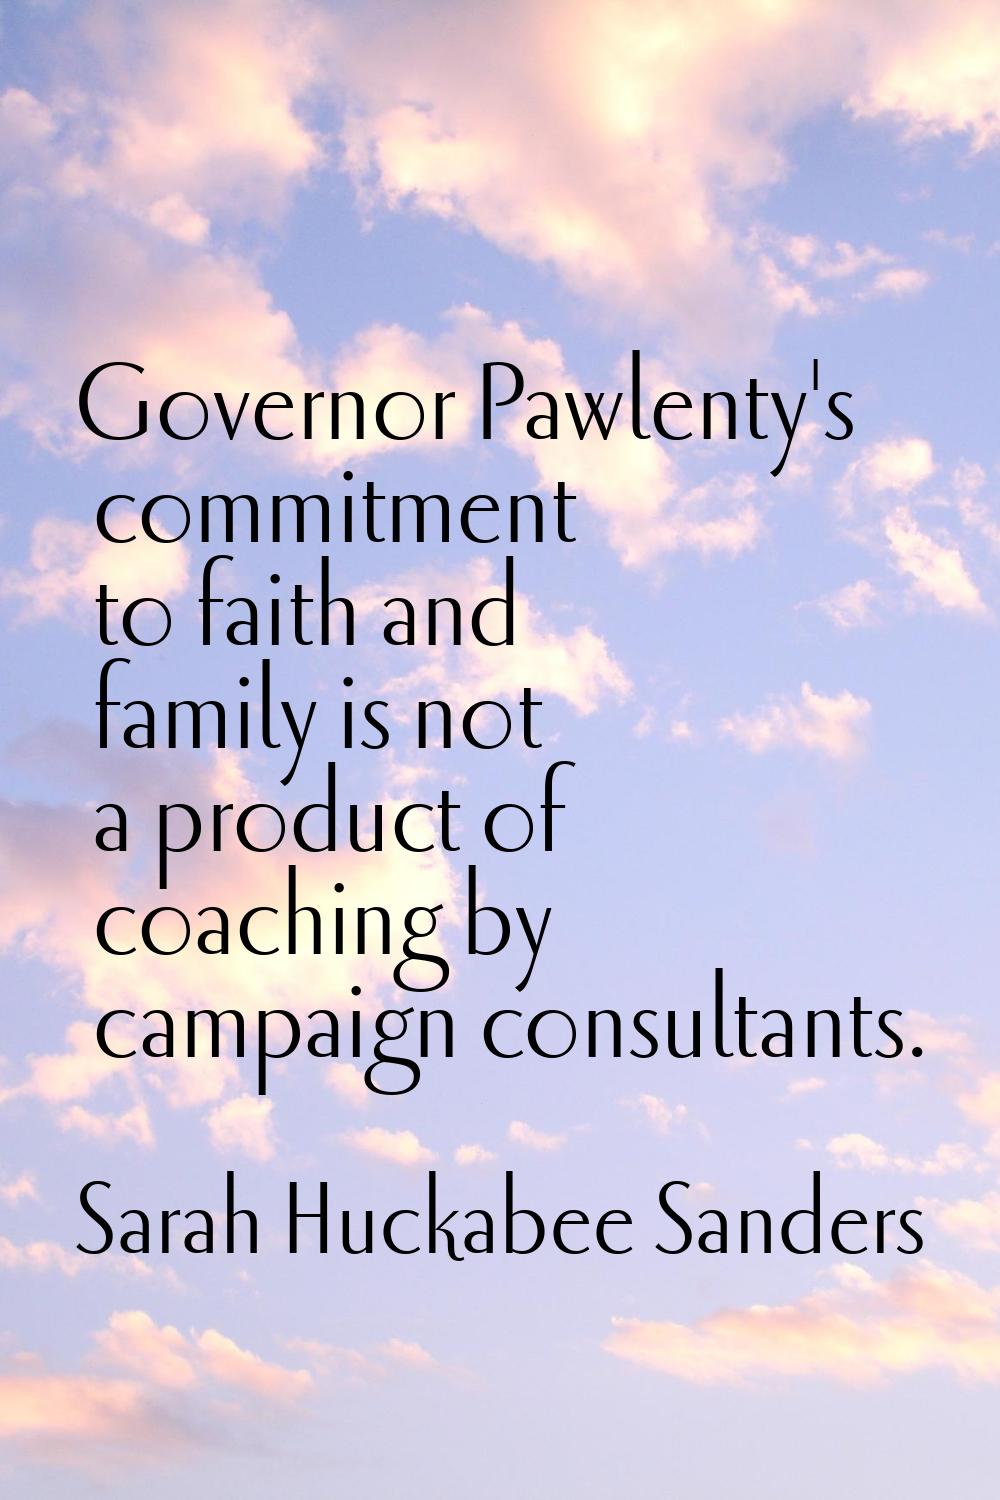 Governor Pawlenty's commitment to faith and family is not a product of coaching by campaign consult